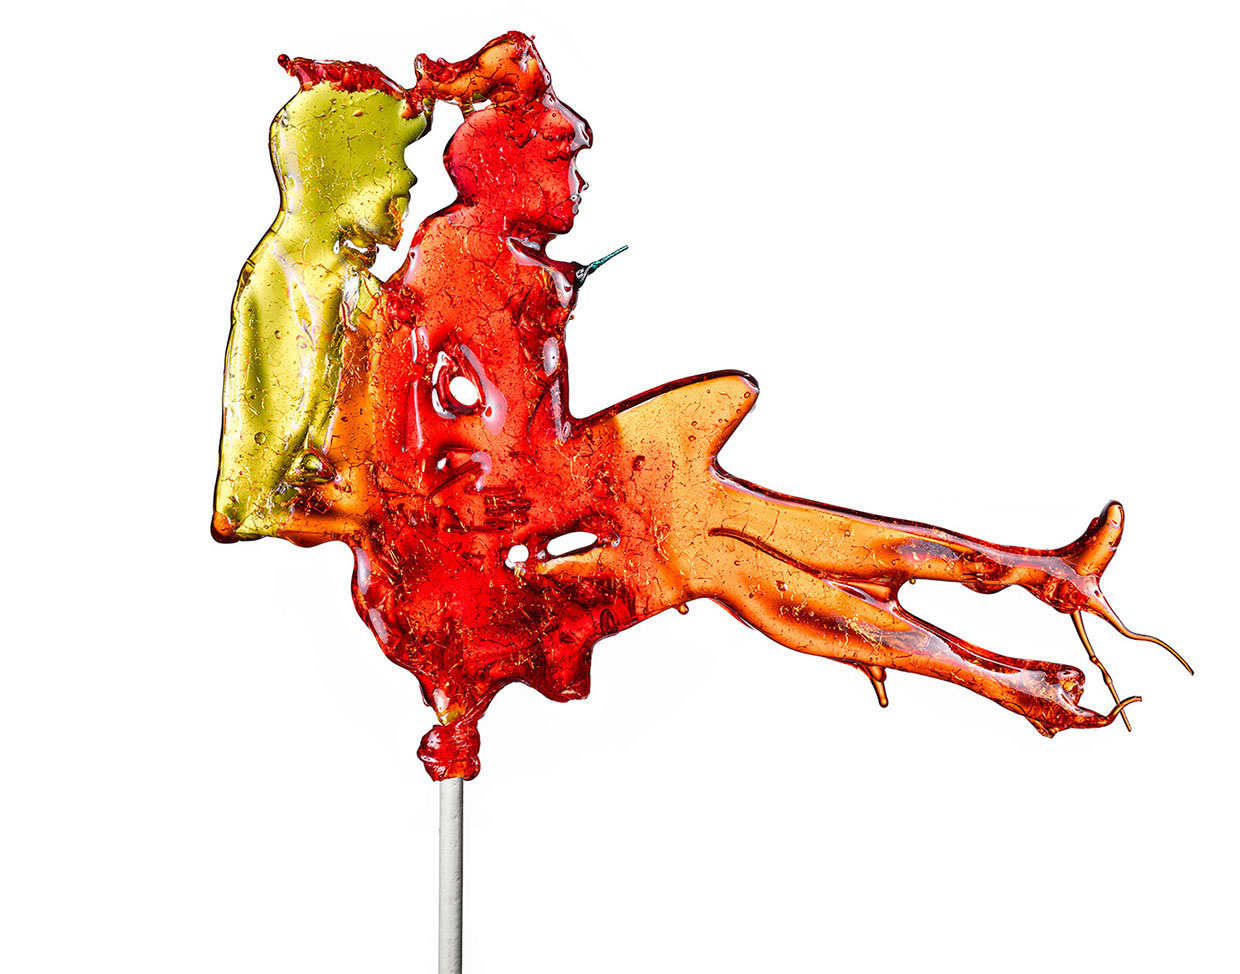 Adult-Only Lollipops Shaped Into Naughty Kama Sutra Positions  